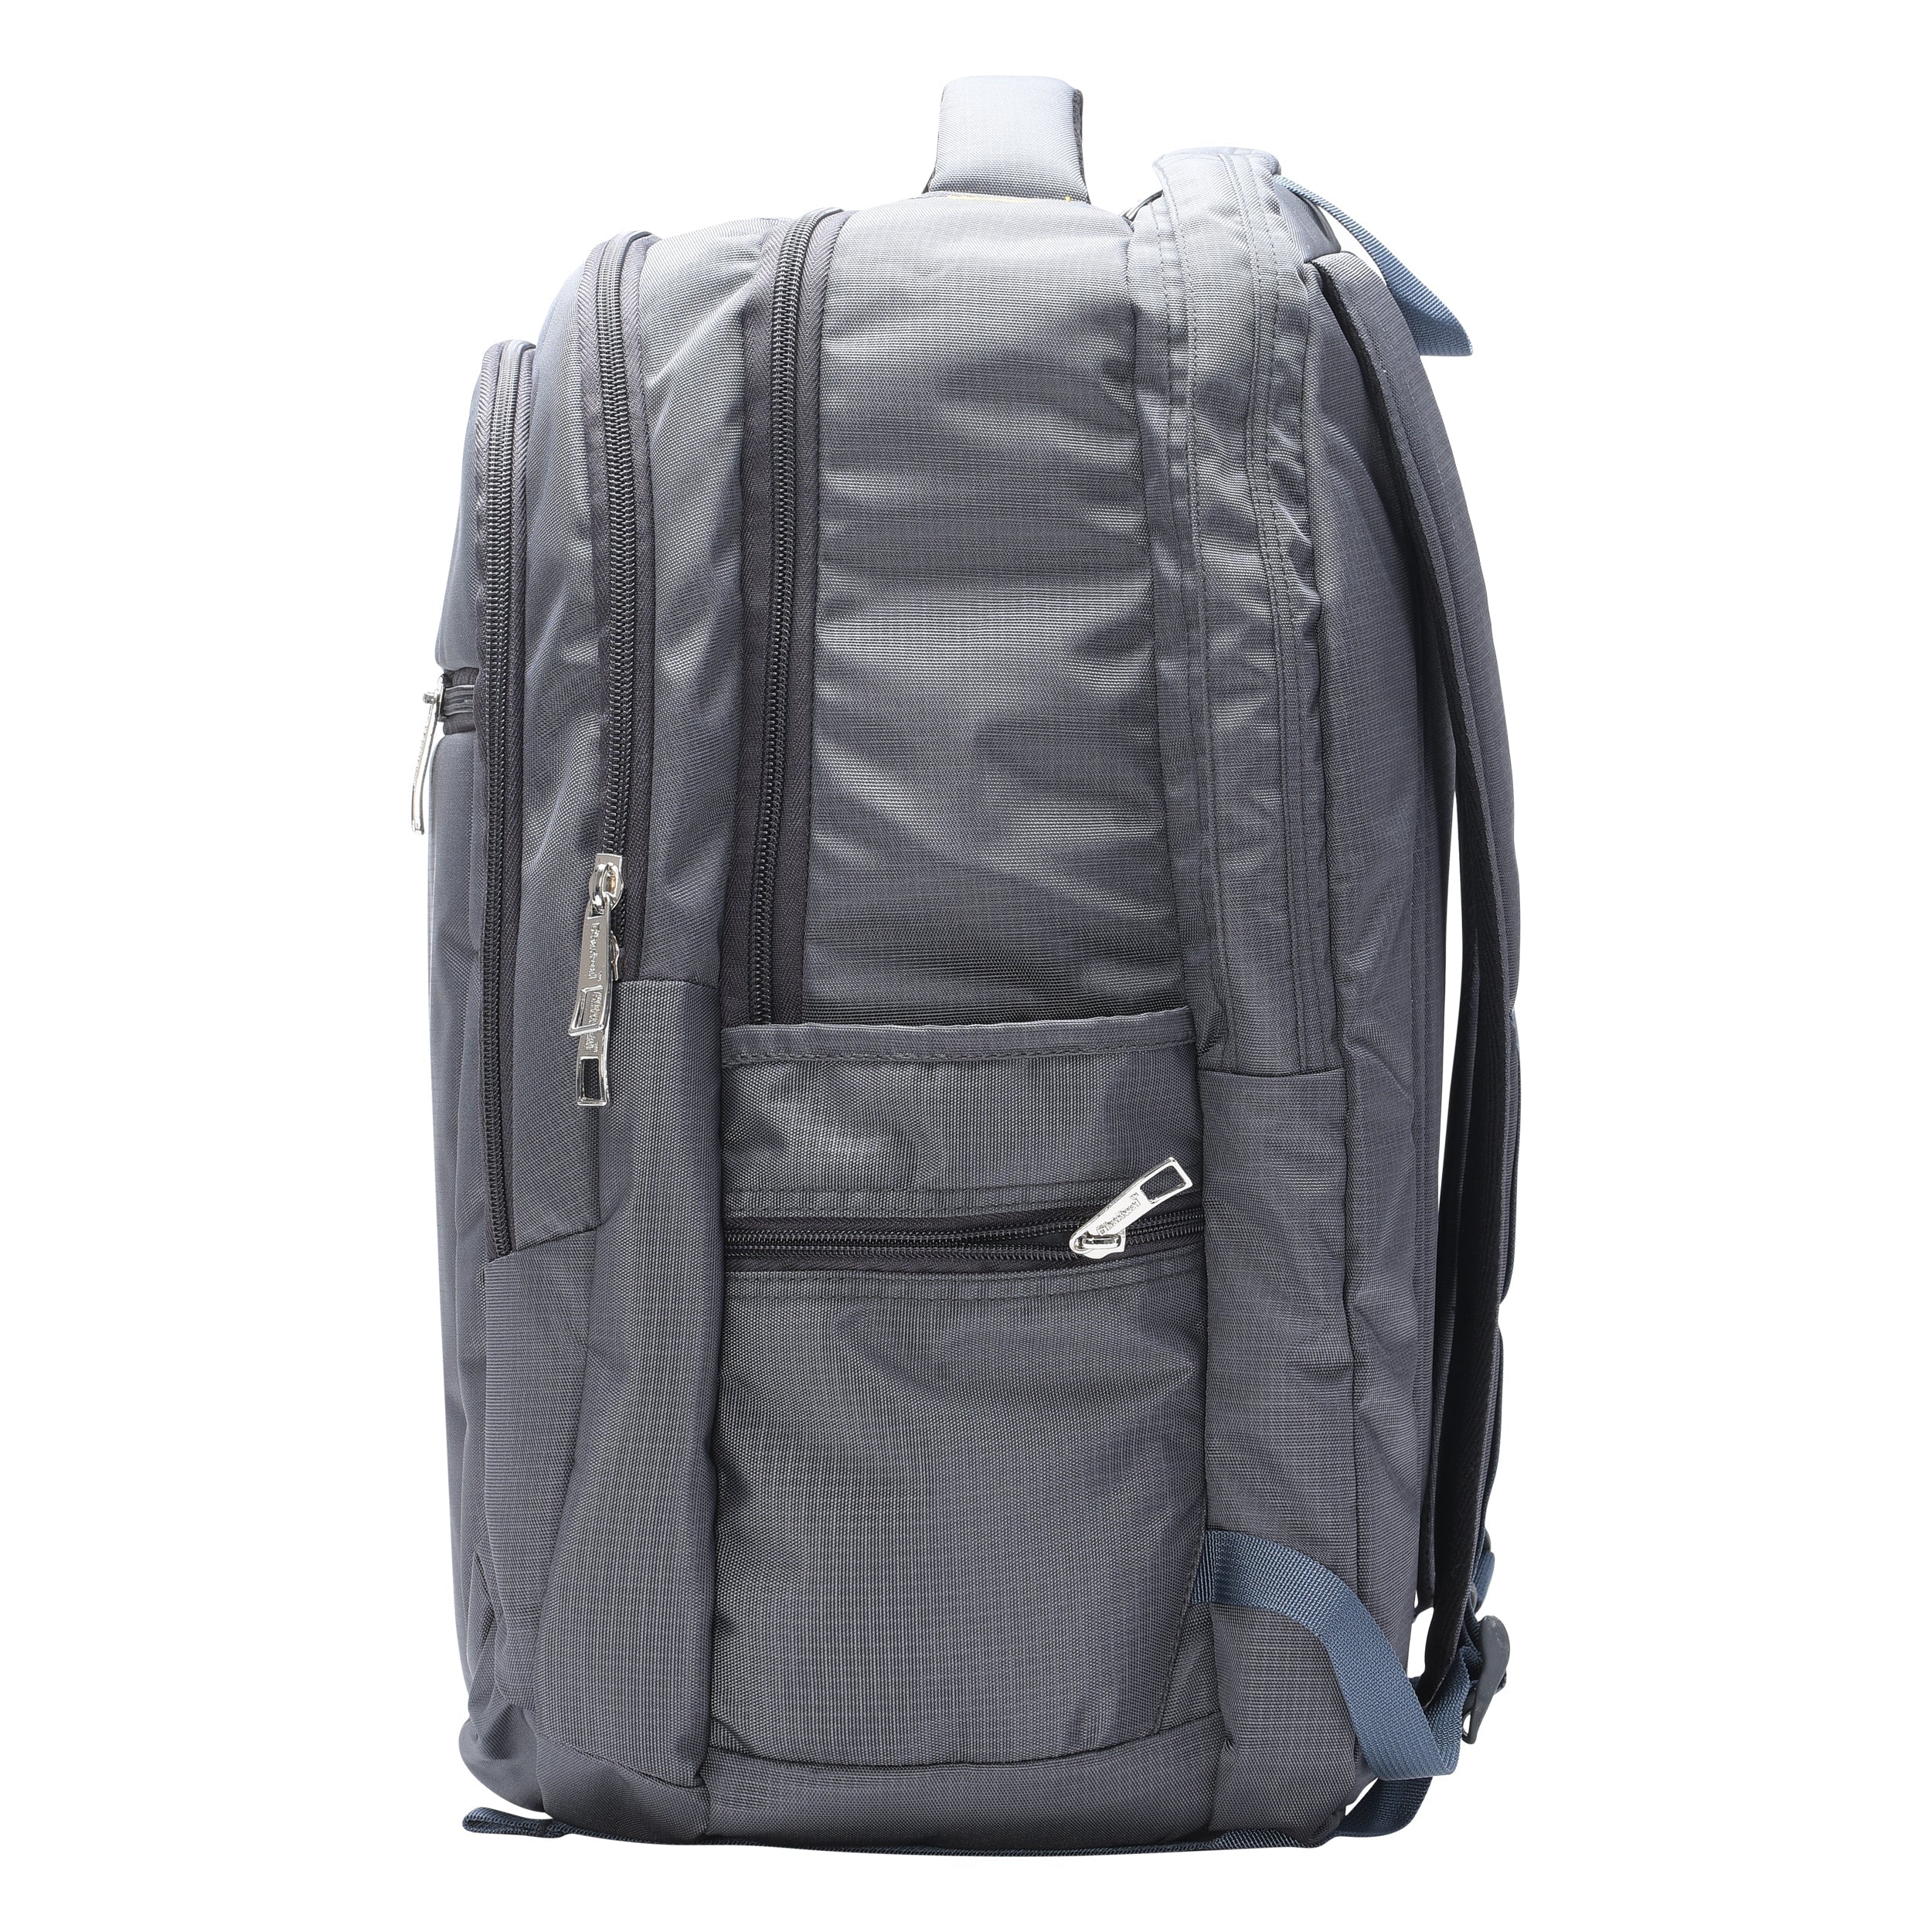 What is the best laptop backpack? - Quora